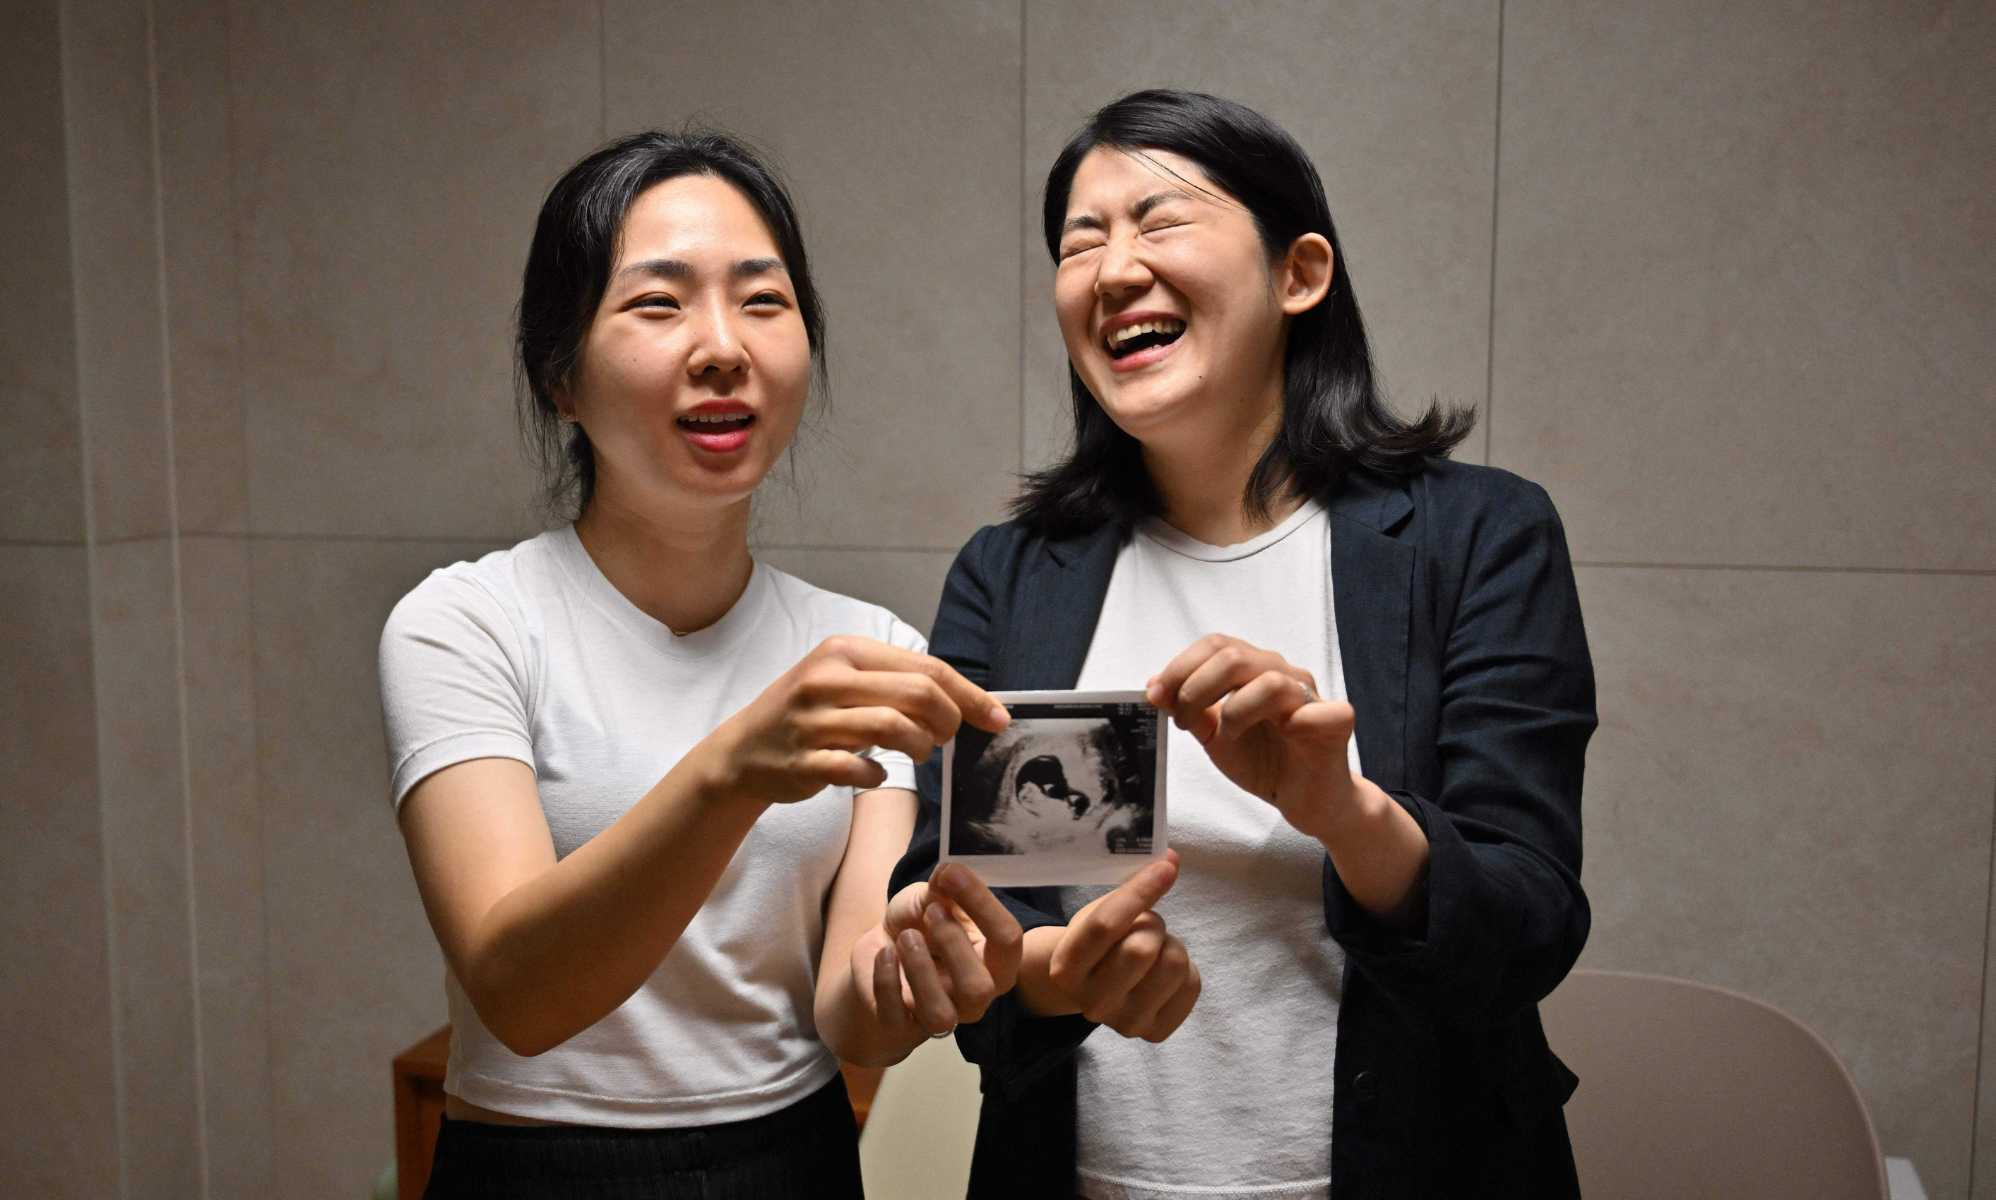 South Korea Lesbian couple welcomes child in historic first image